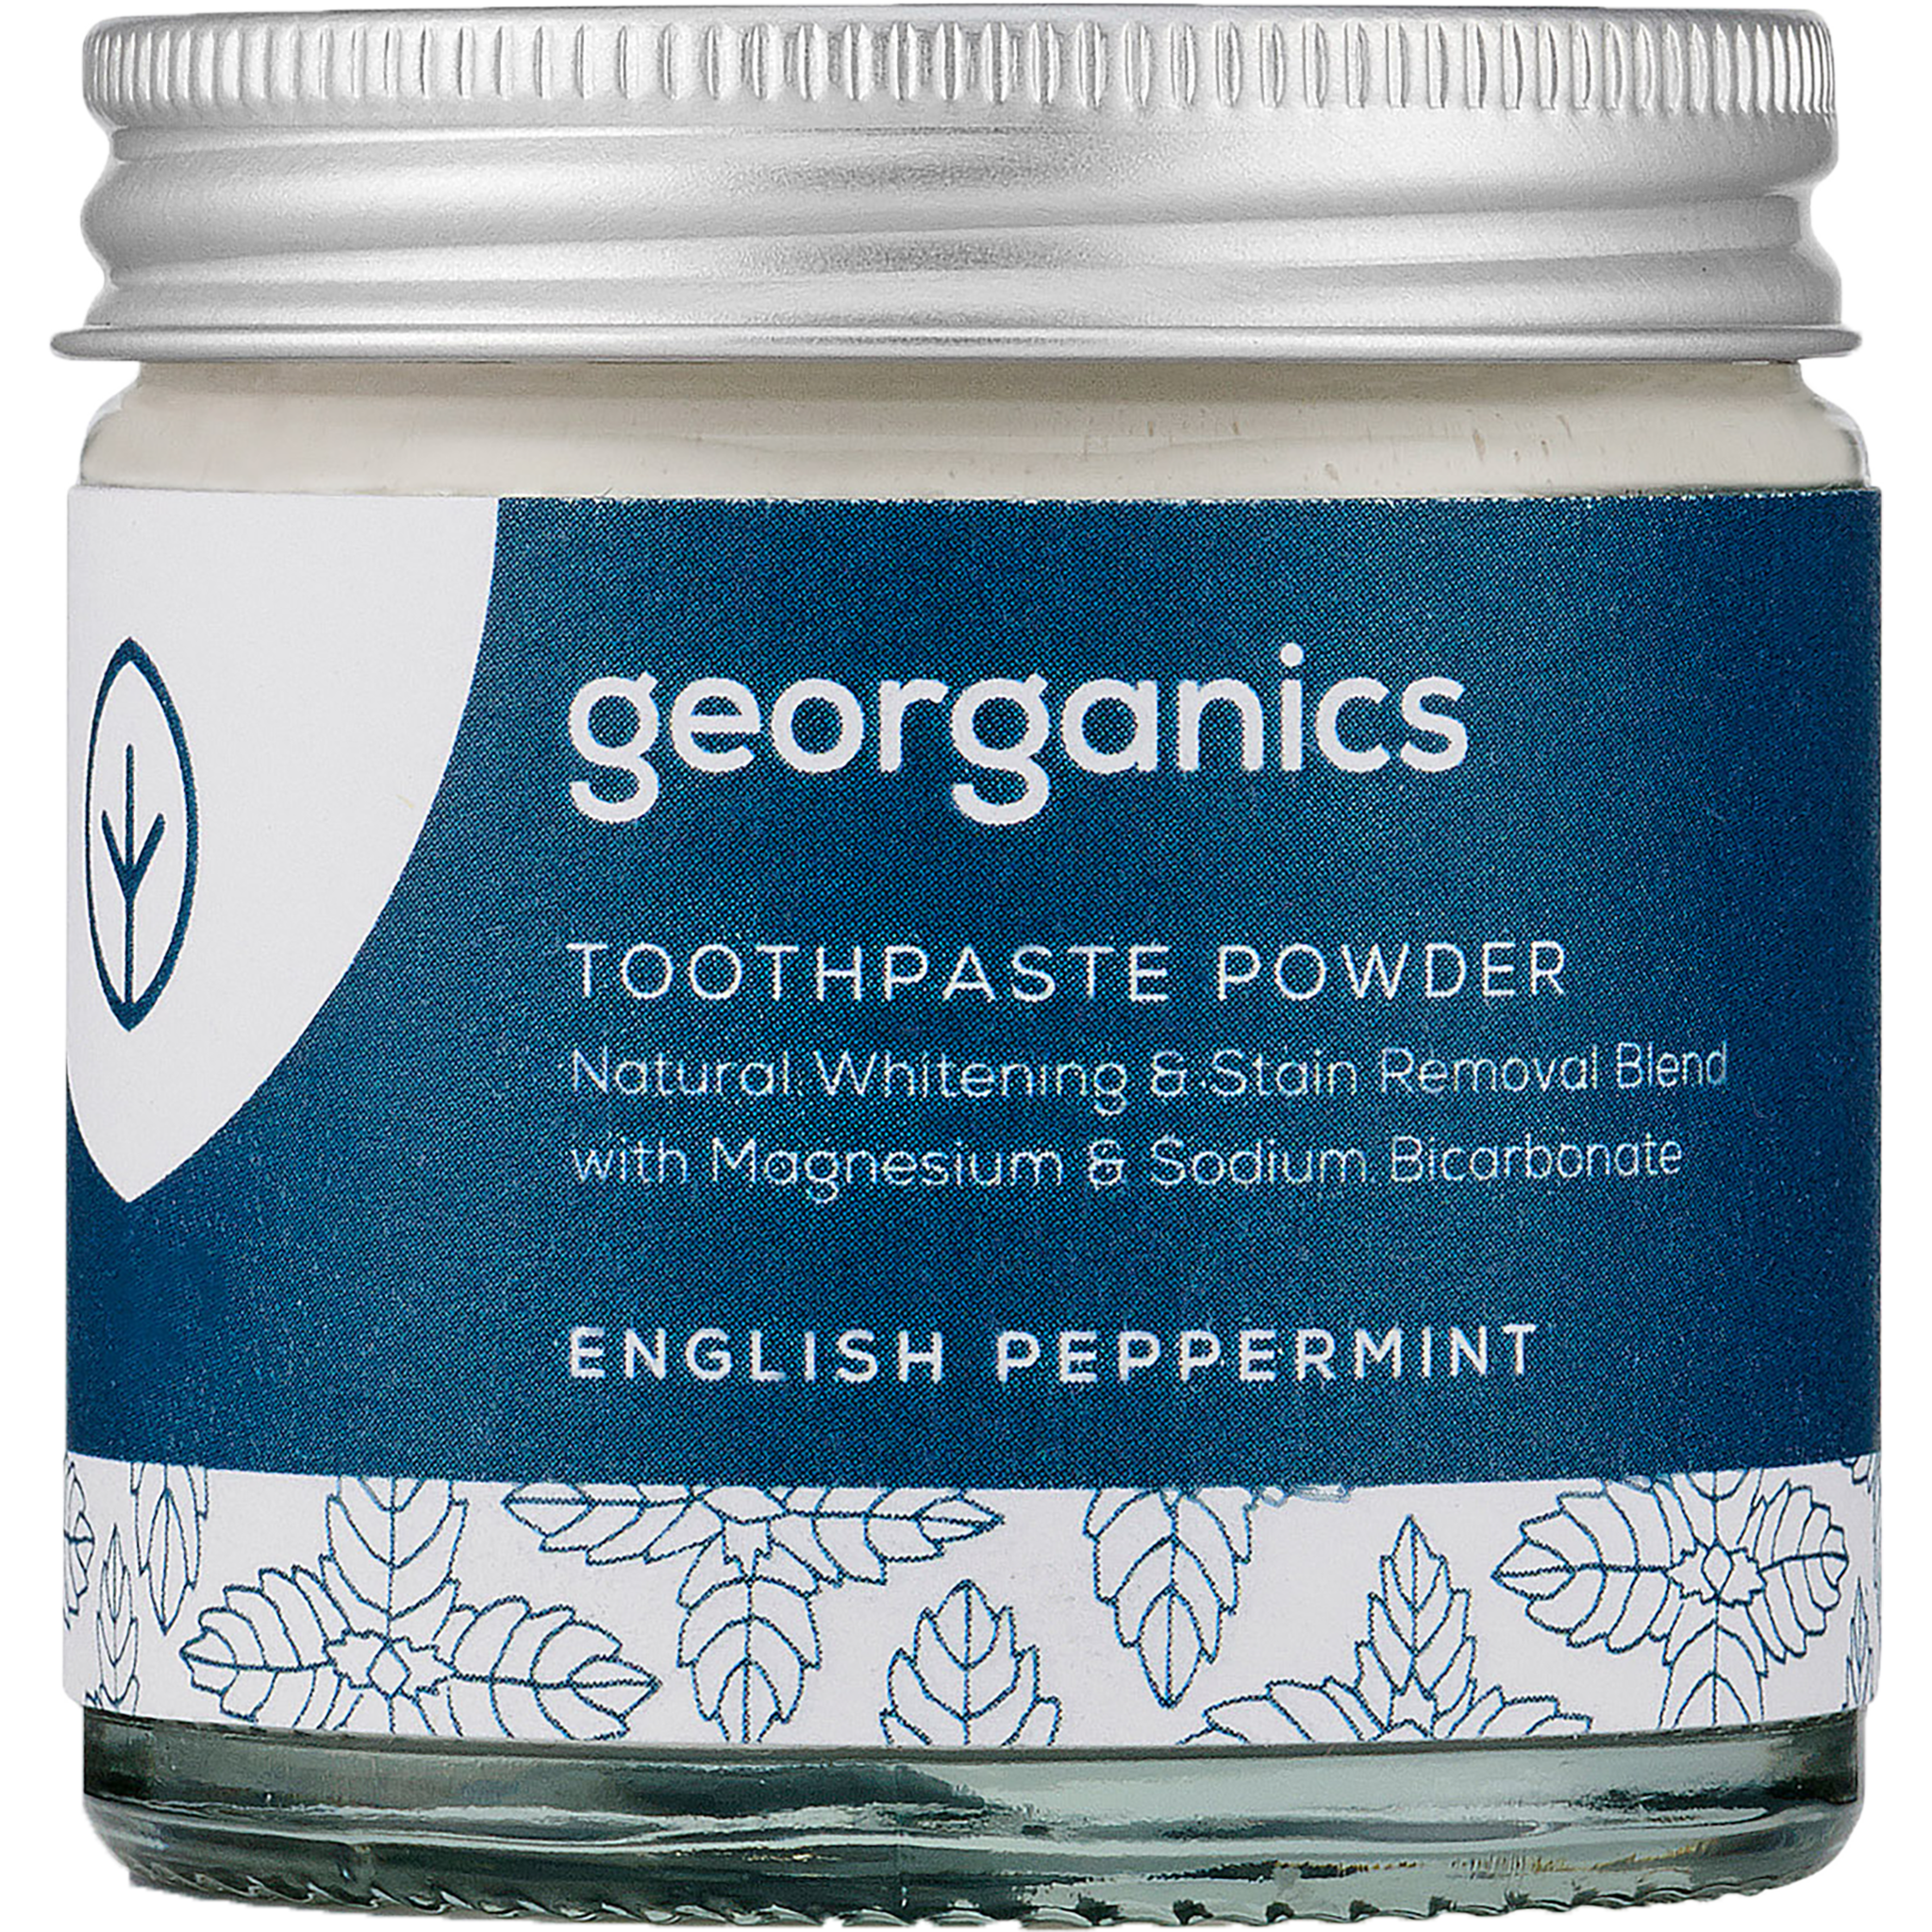 Georganics Toothpaste Powder English Peppermint Natural Body Care-Image 1